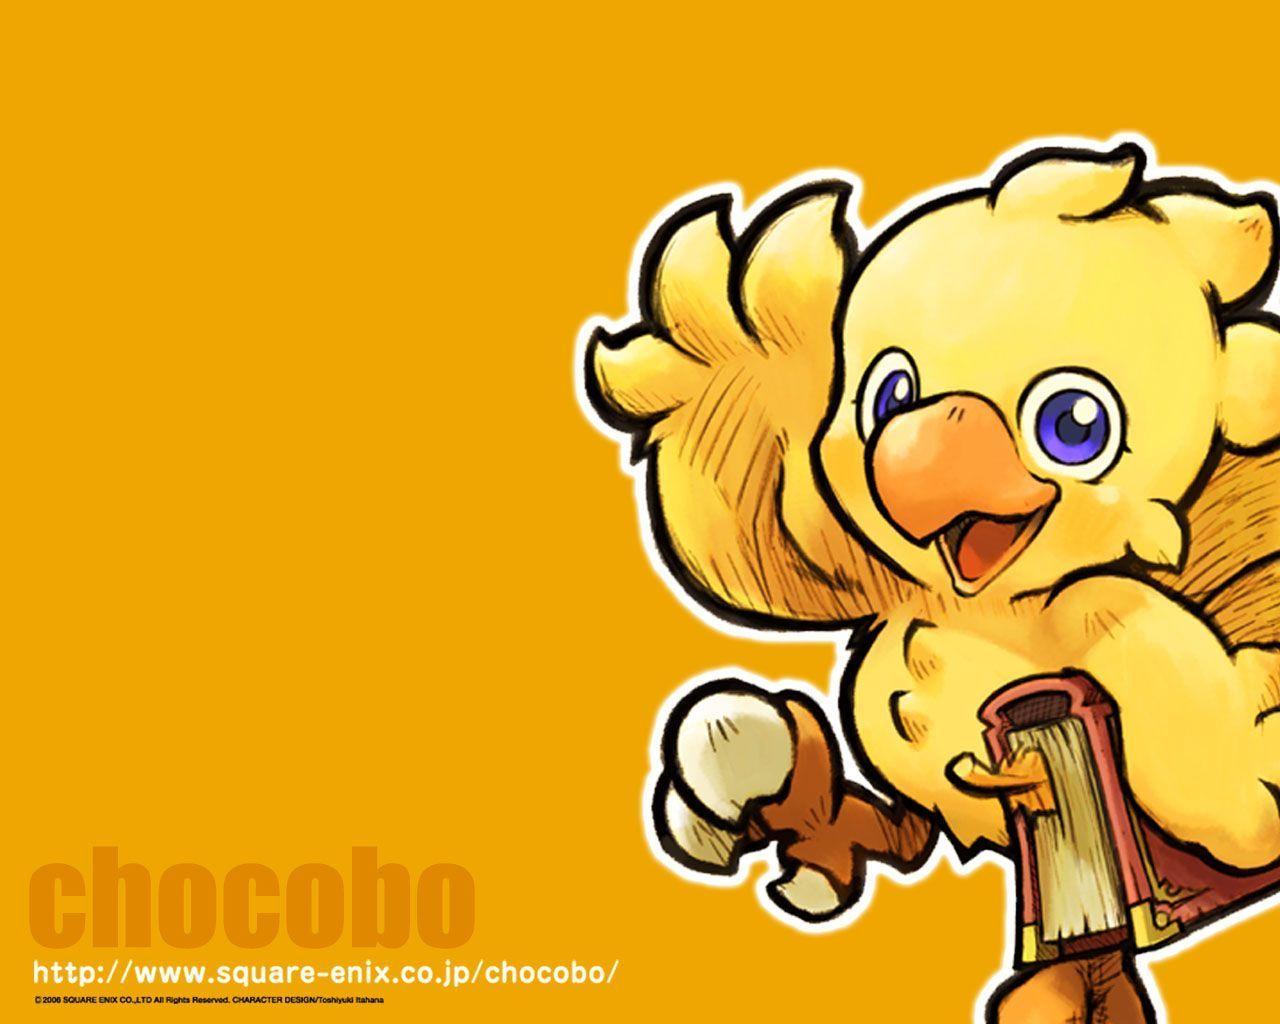 image For > Cute Chocobo Wallpaper